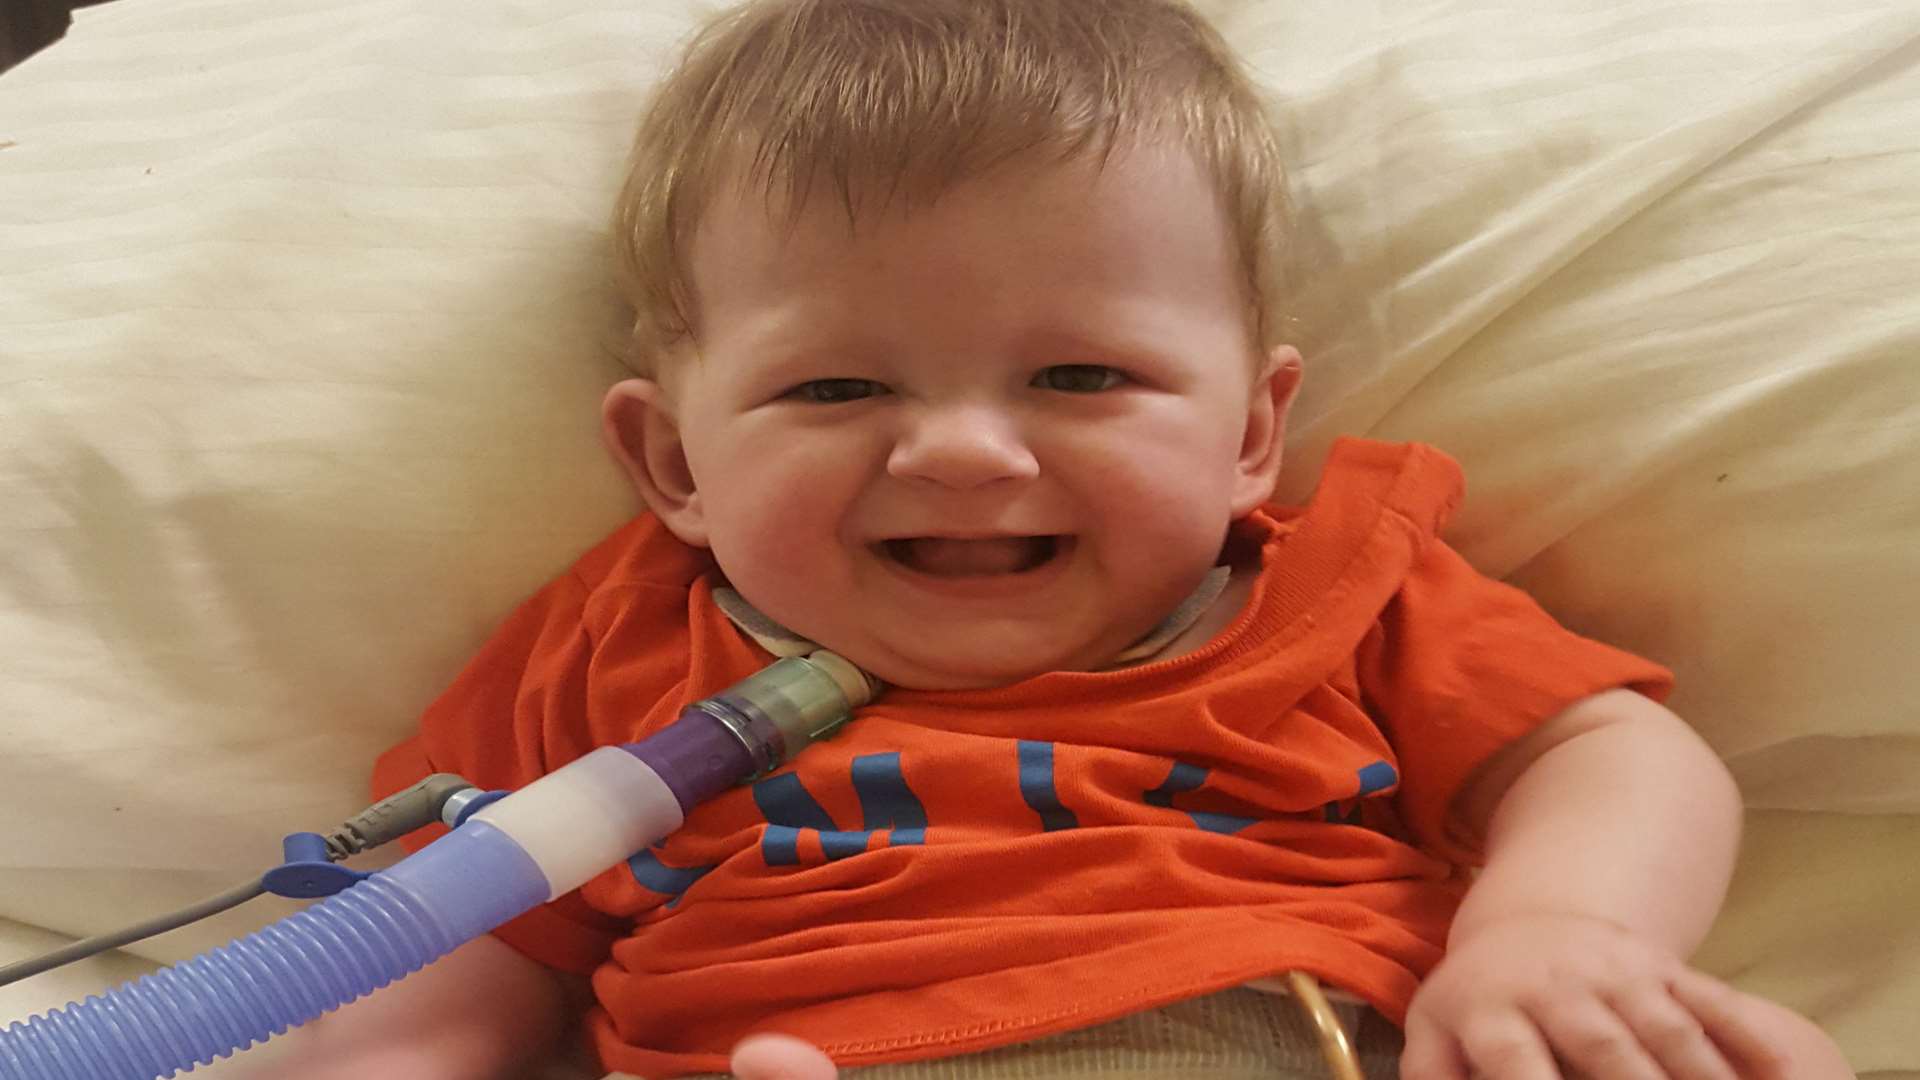 Little Noah could soon be going home